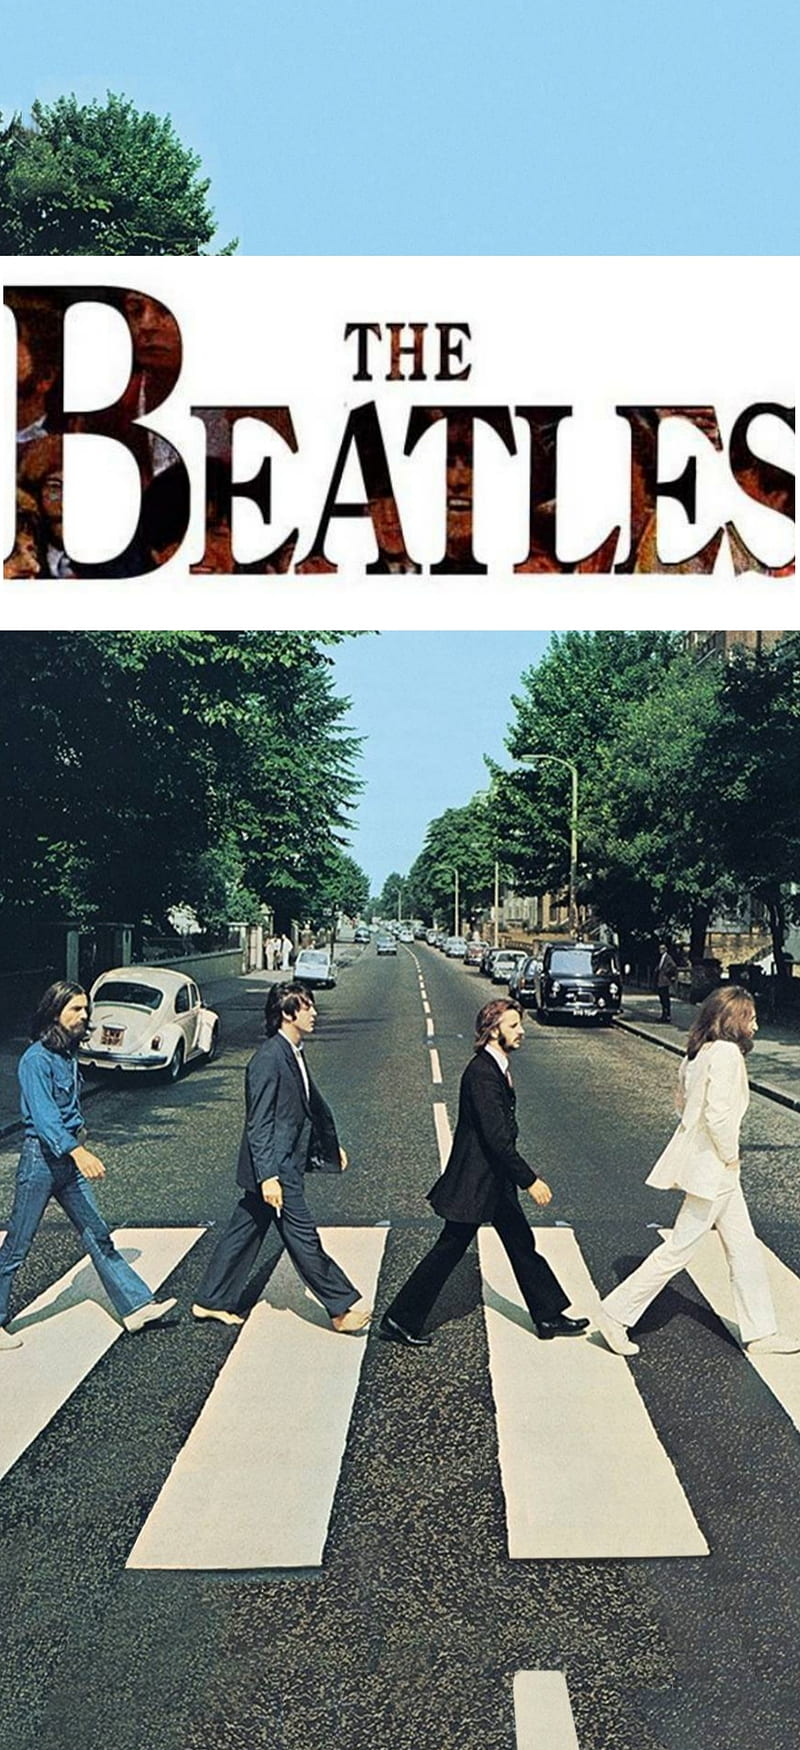 TheBeatles, abbey road, the beatles, HD phone wallpaper